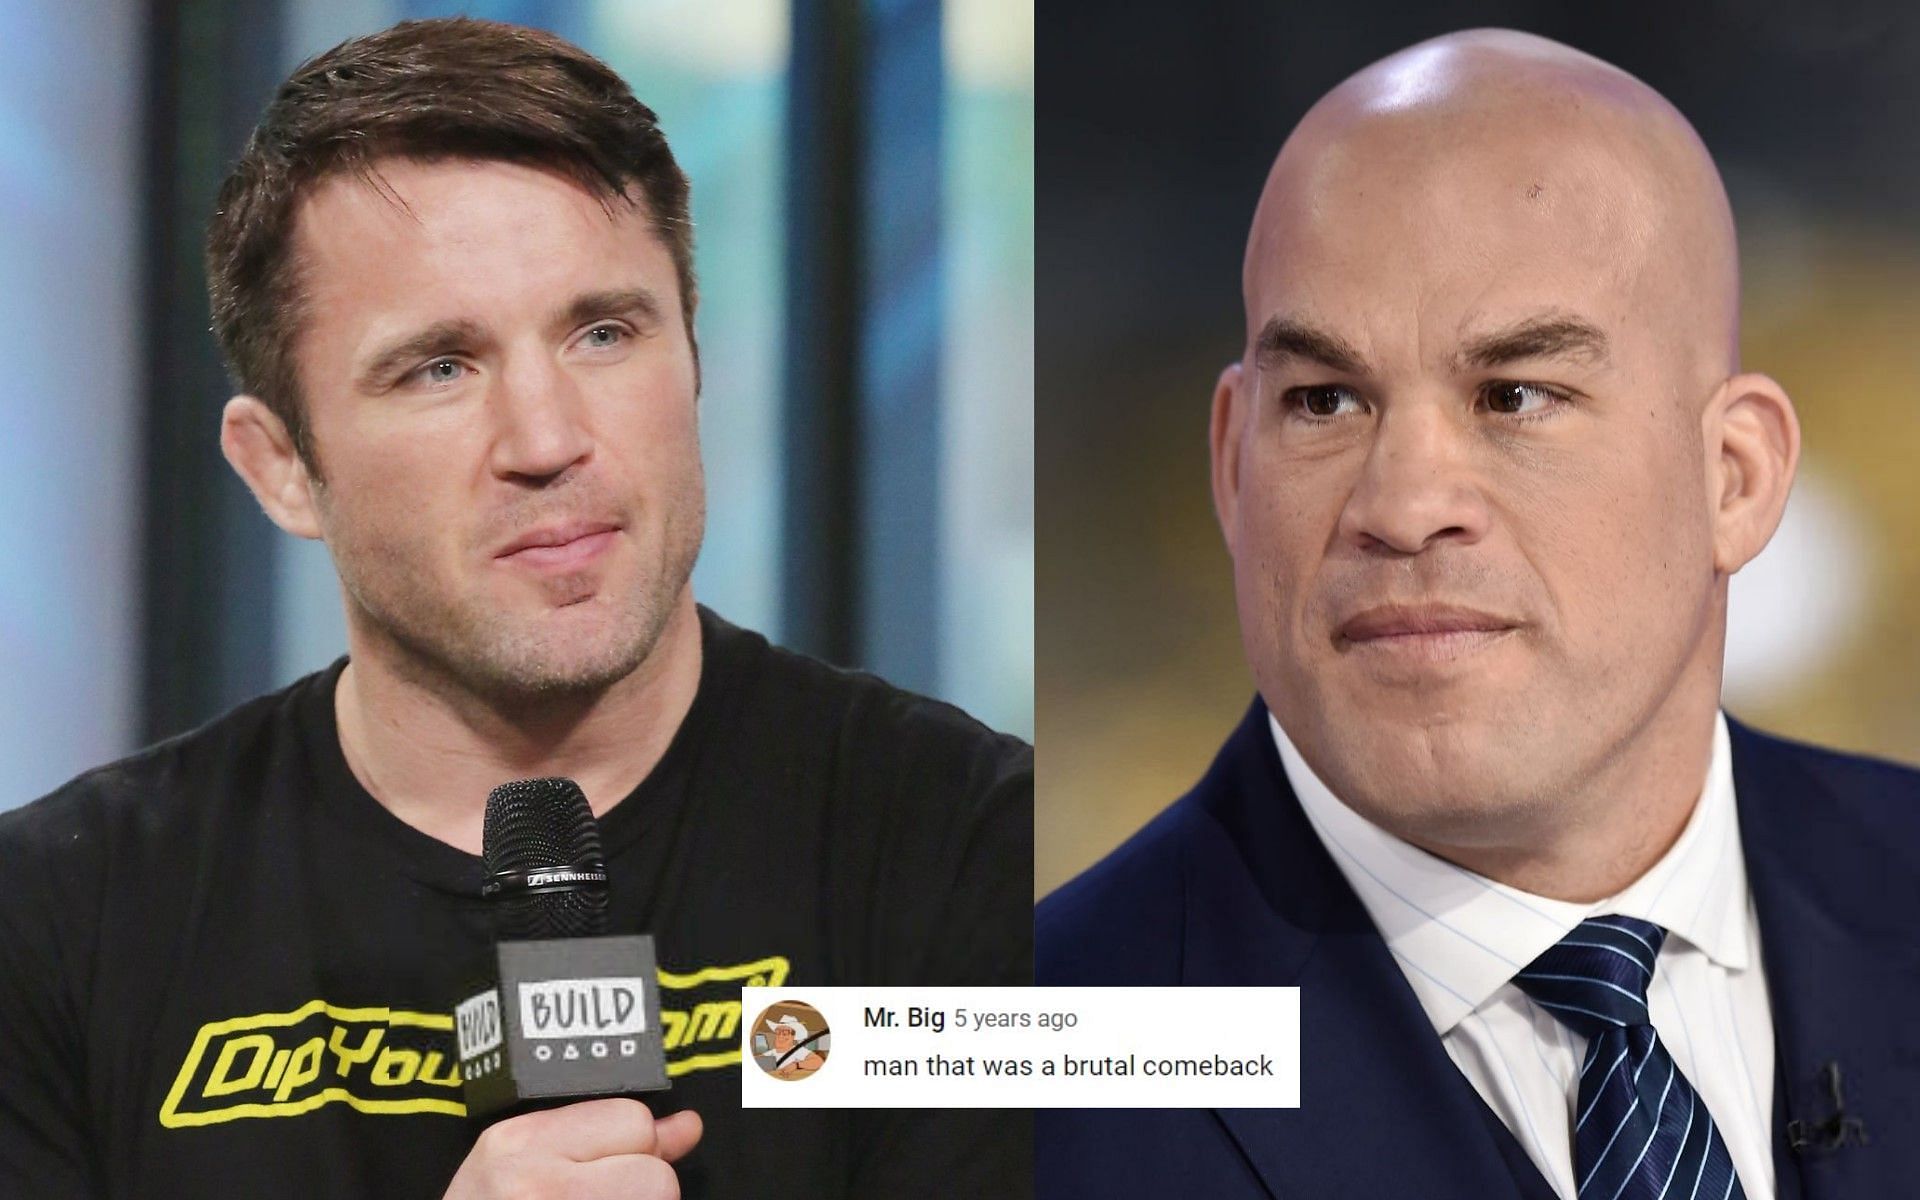 Chael Sonnen (left) and Tito Ortiz (right) [Images Courtesy: @GettyImages]